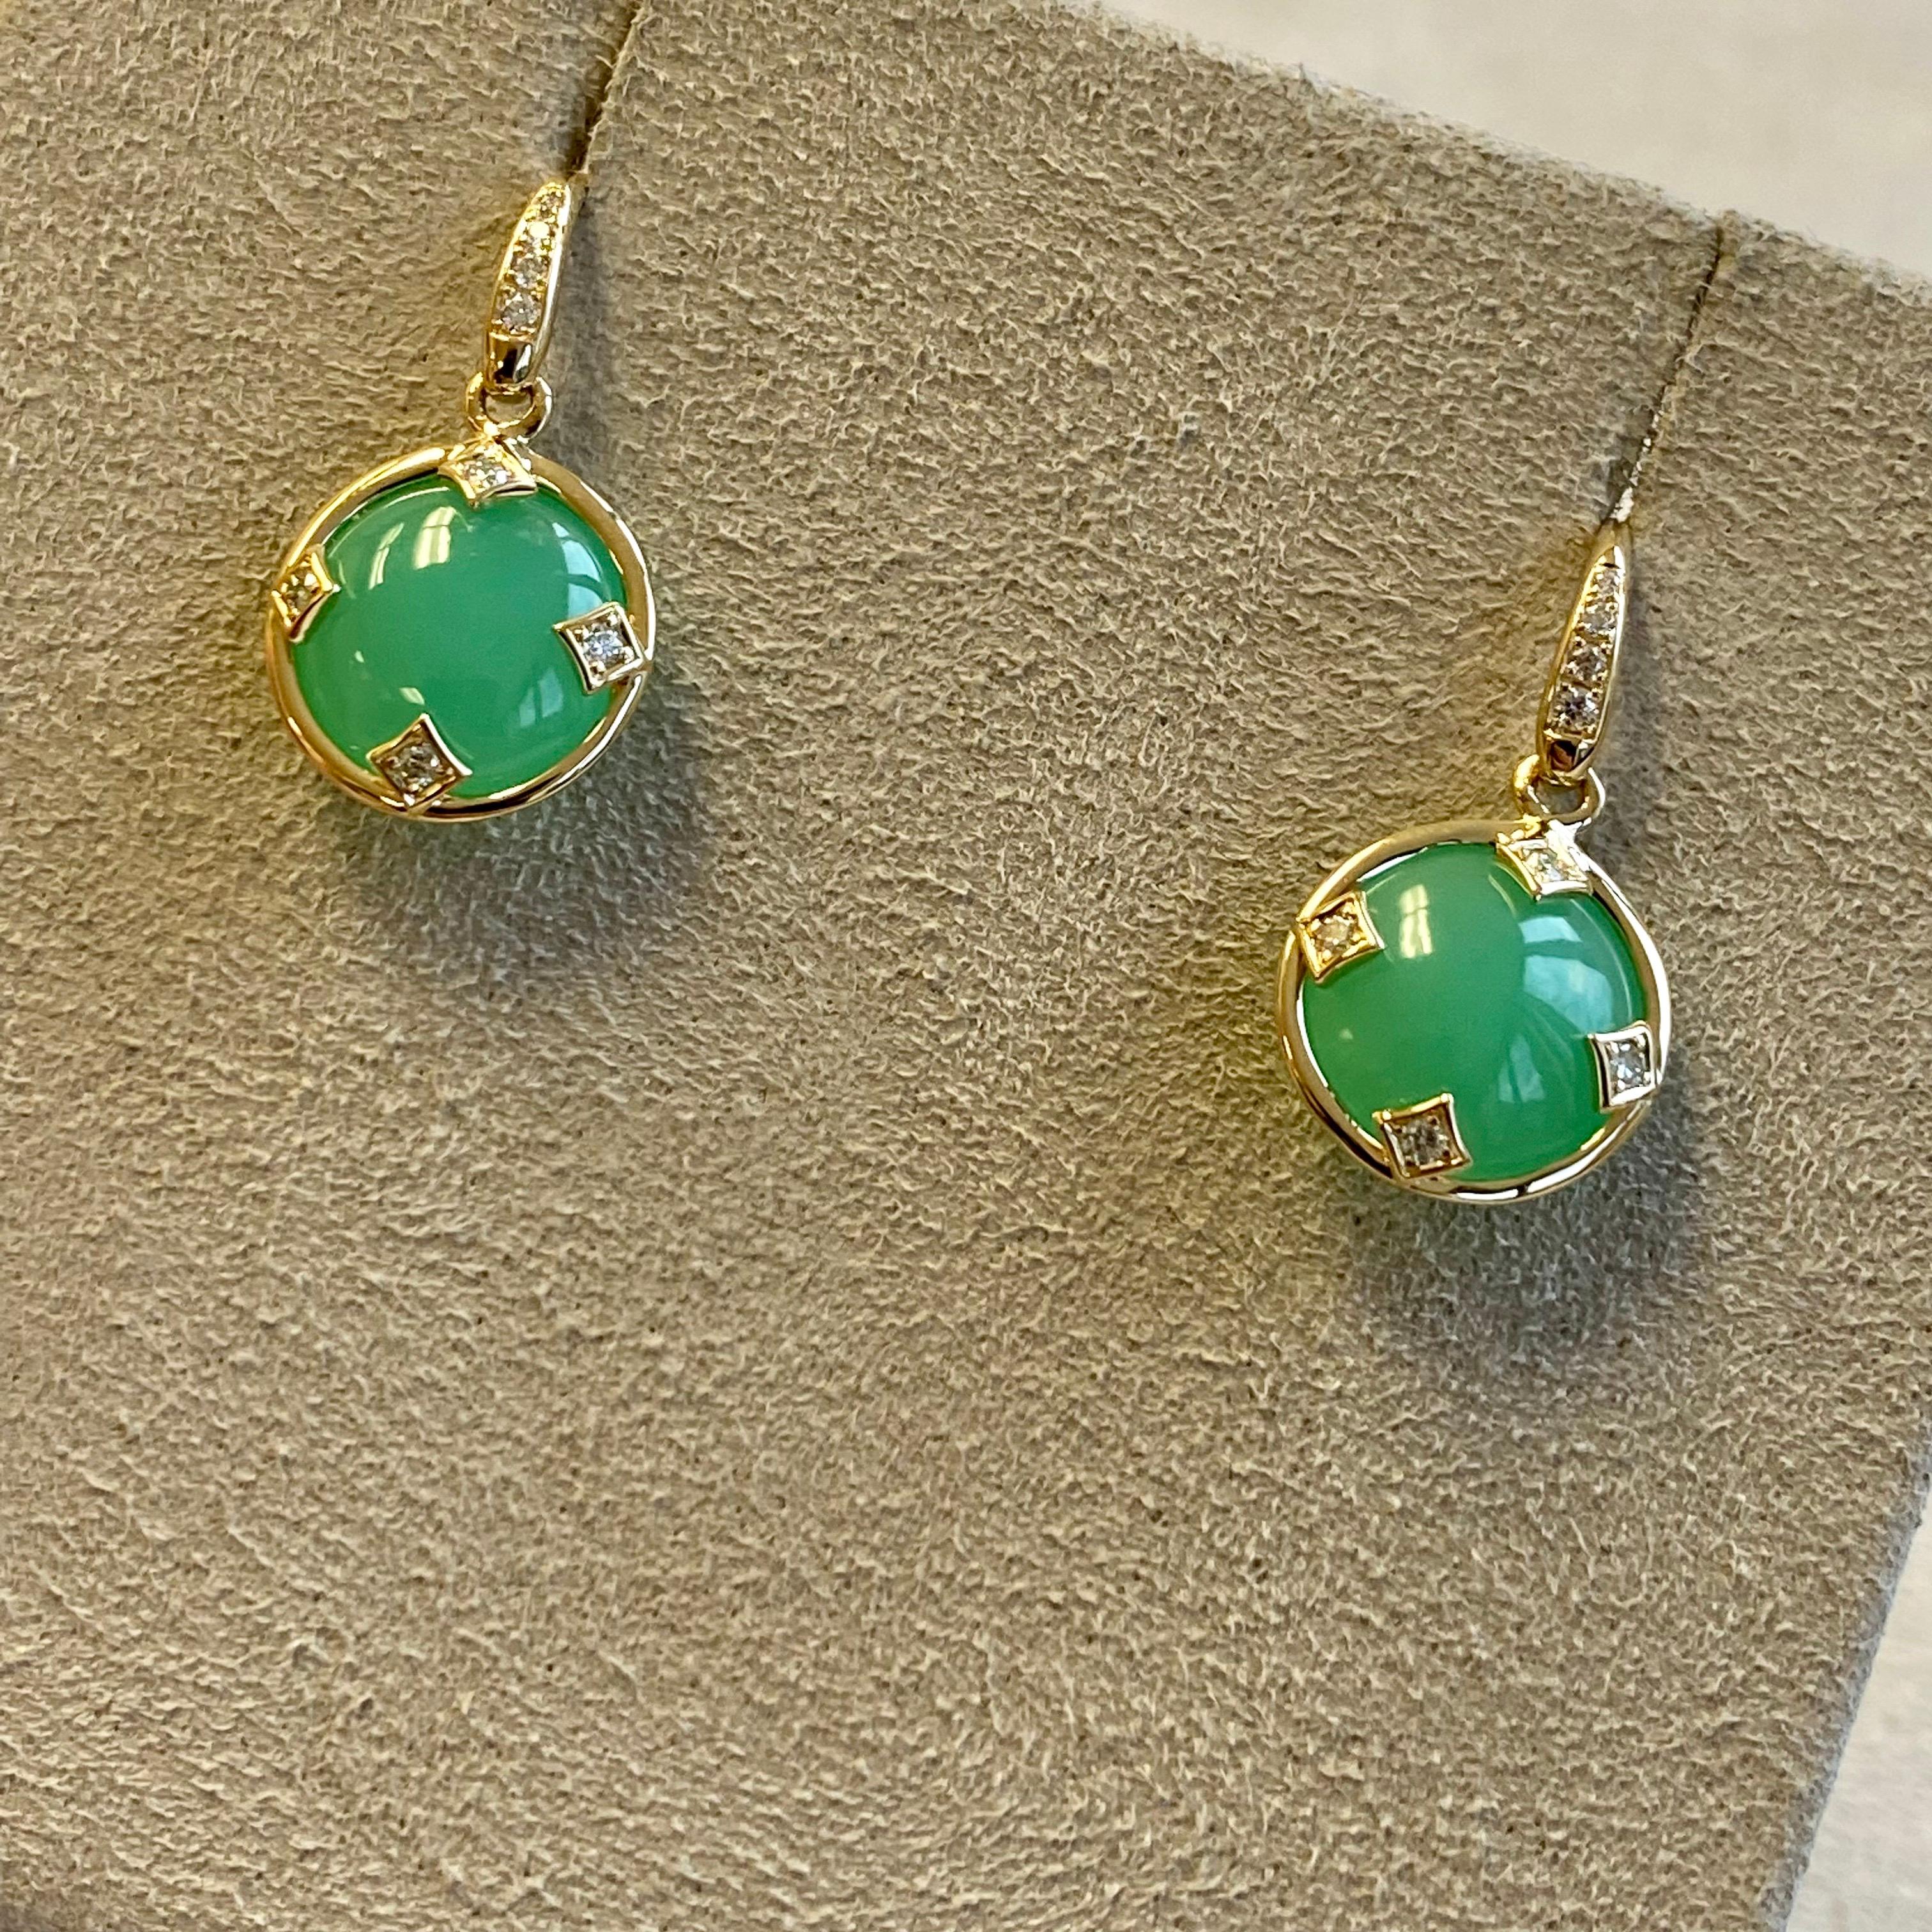 Created in 18 karat yellow gold
Chrysoprase 7.0 carats approx.
Diamonds 0.10 carat approx.
French wire for pierced ears
Limited edition

Effulgent 18 karat yellow gold forges a glorious setting for the splendid Chrysoprase gemstones, totaling